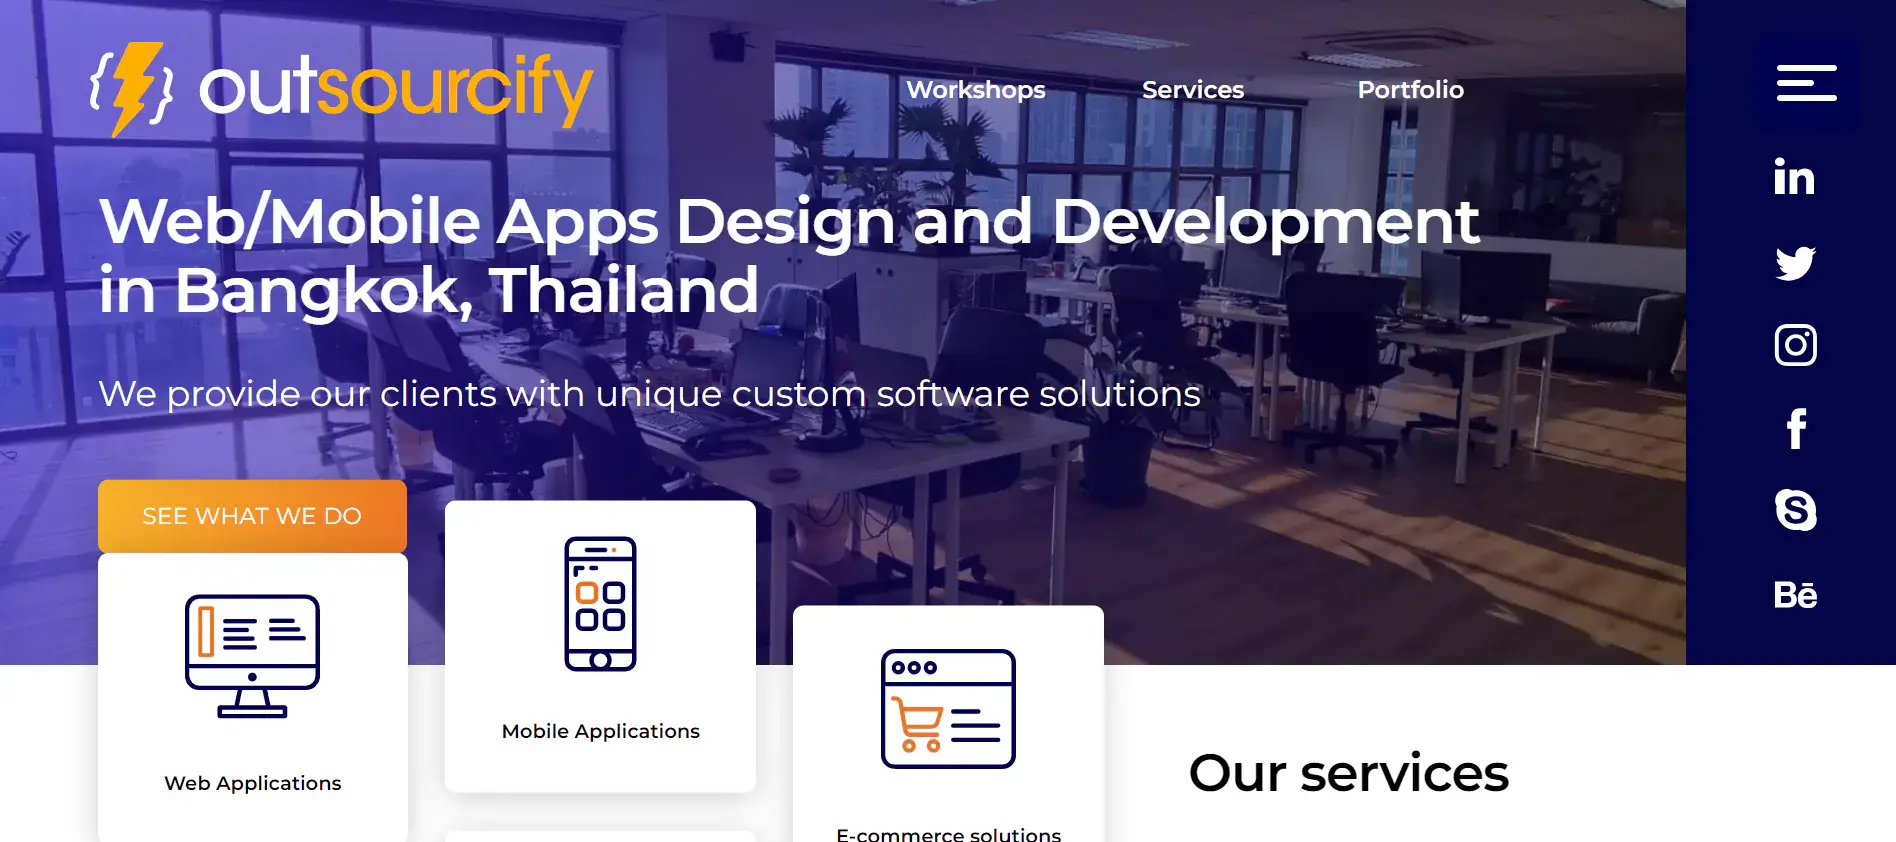 Website development company in Thailand - Outsoucify